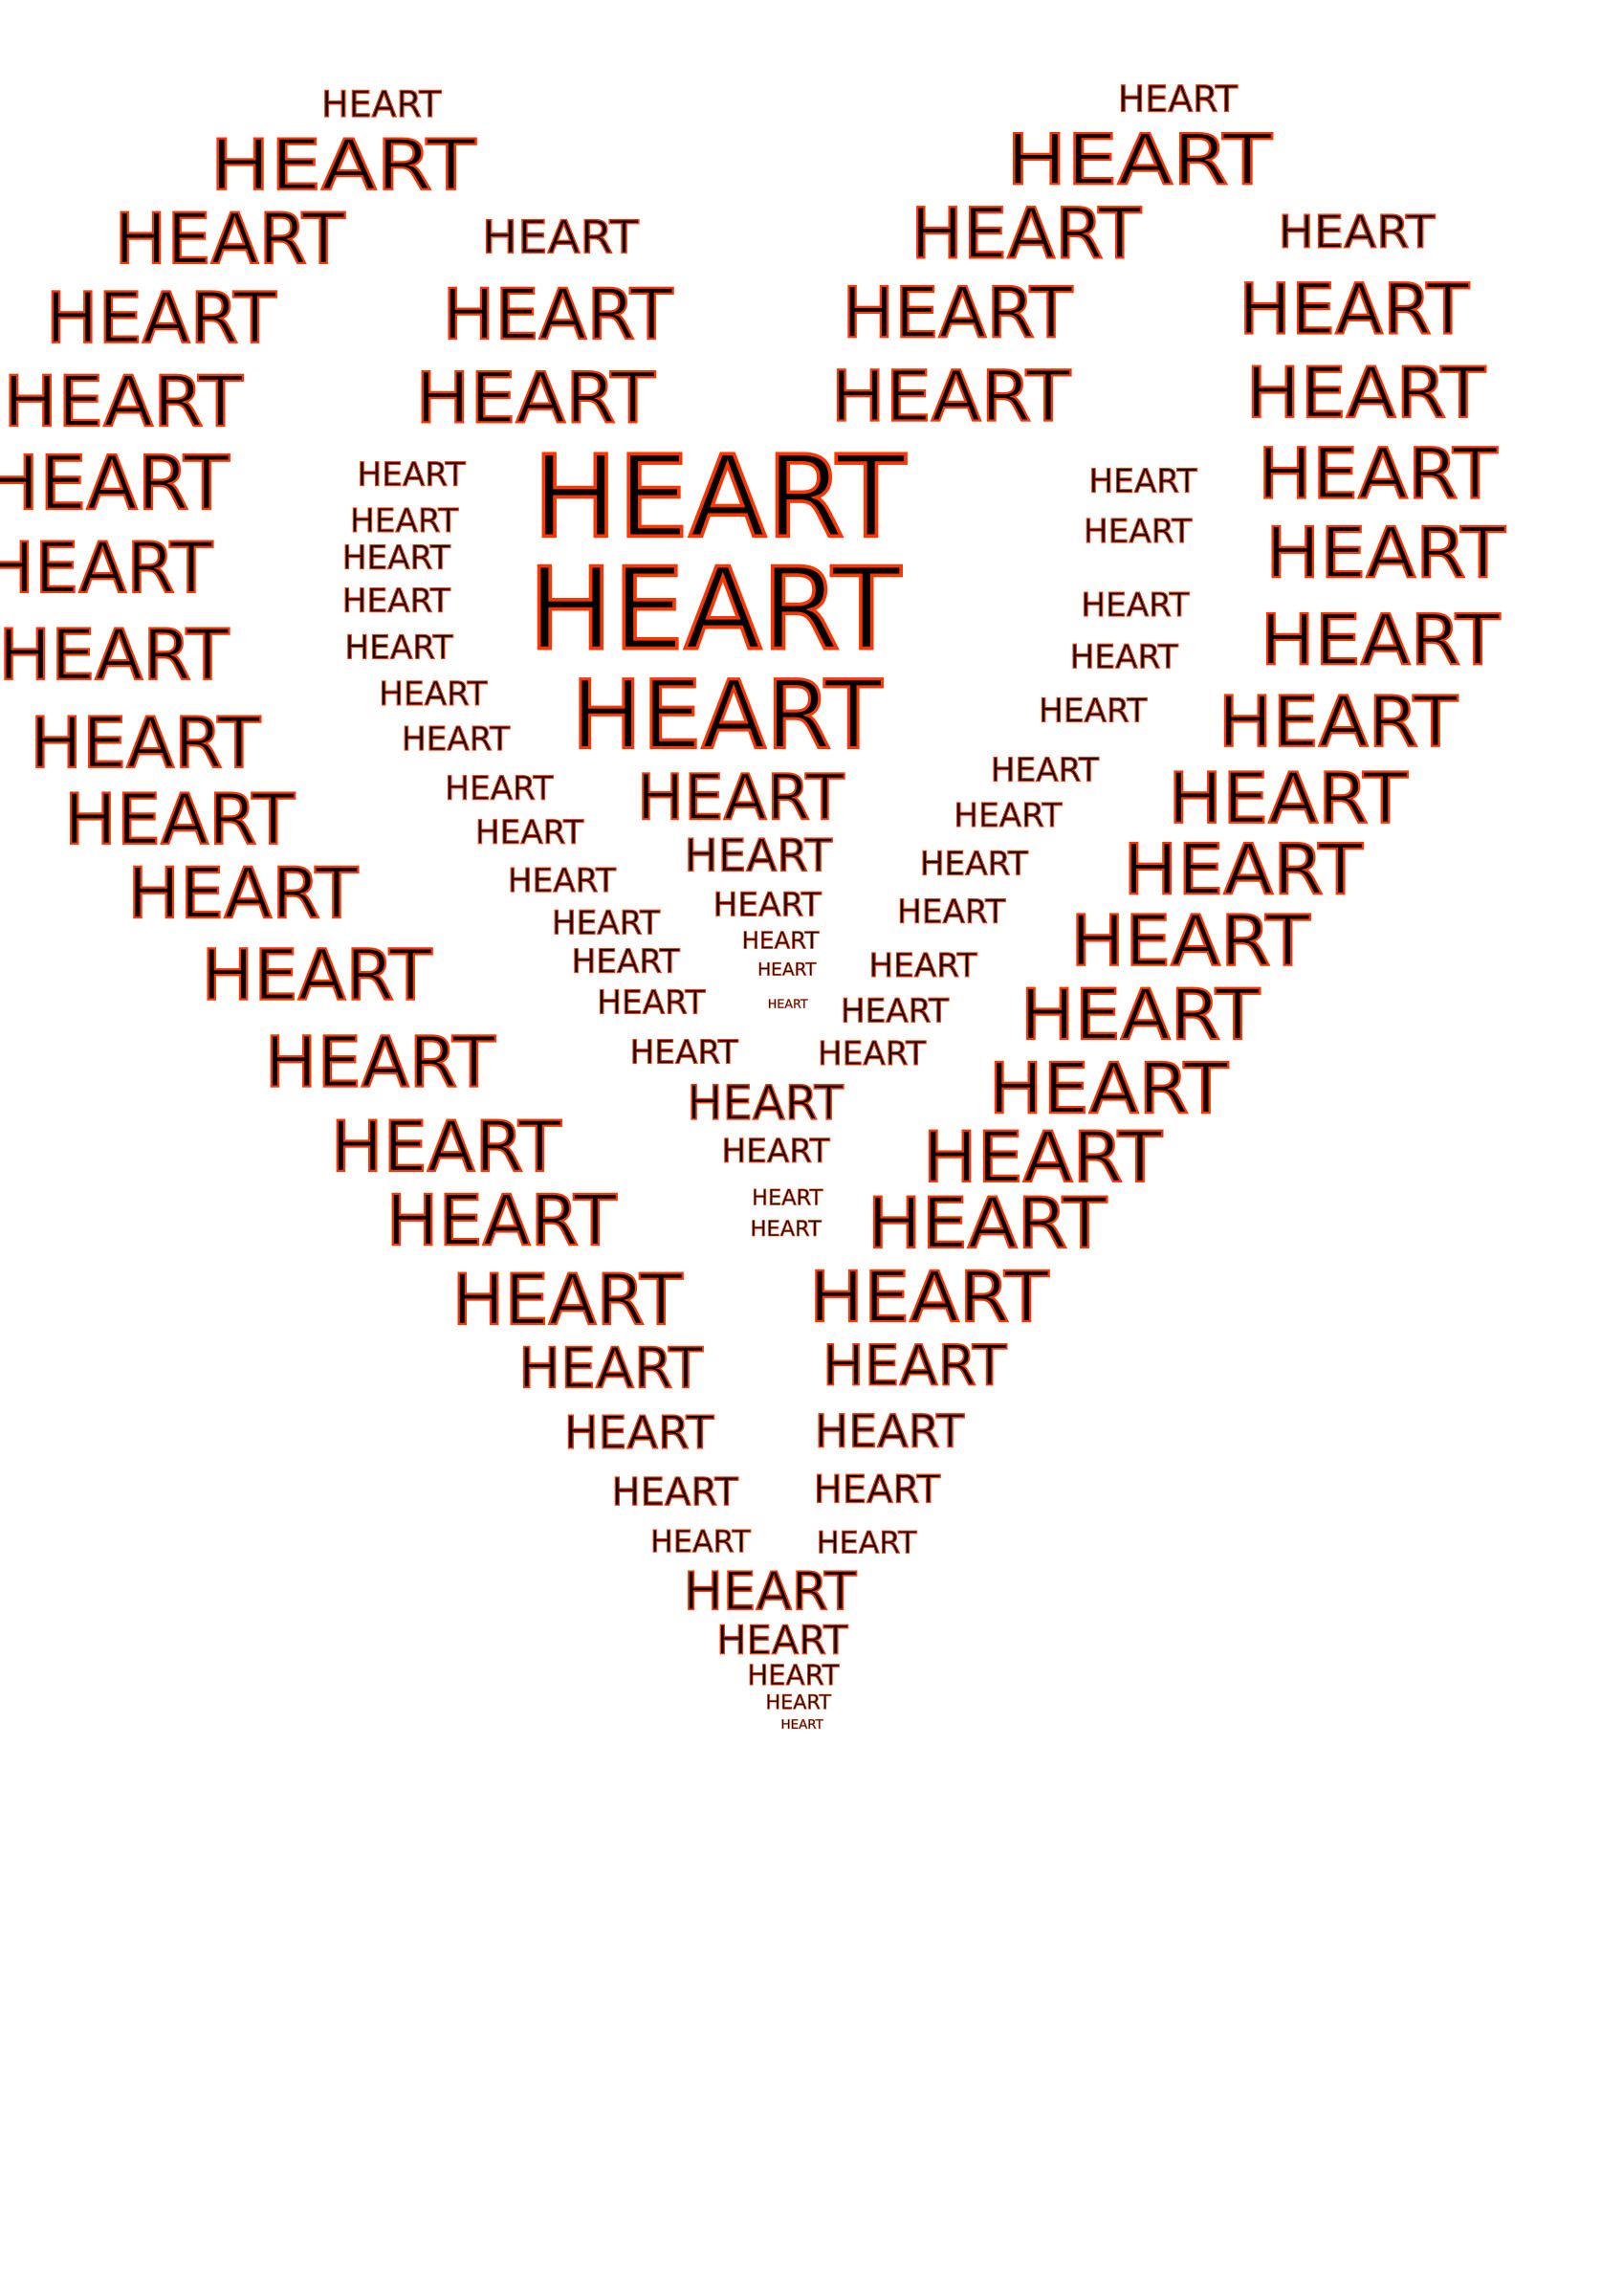 Heart figure done by words Icons PNG - Free PNG and Icons Downloads